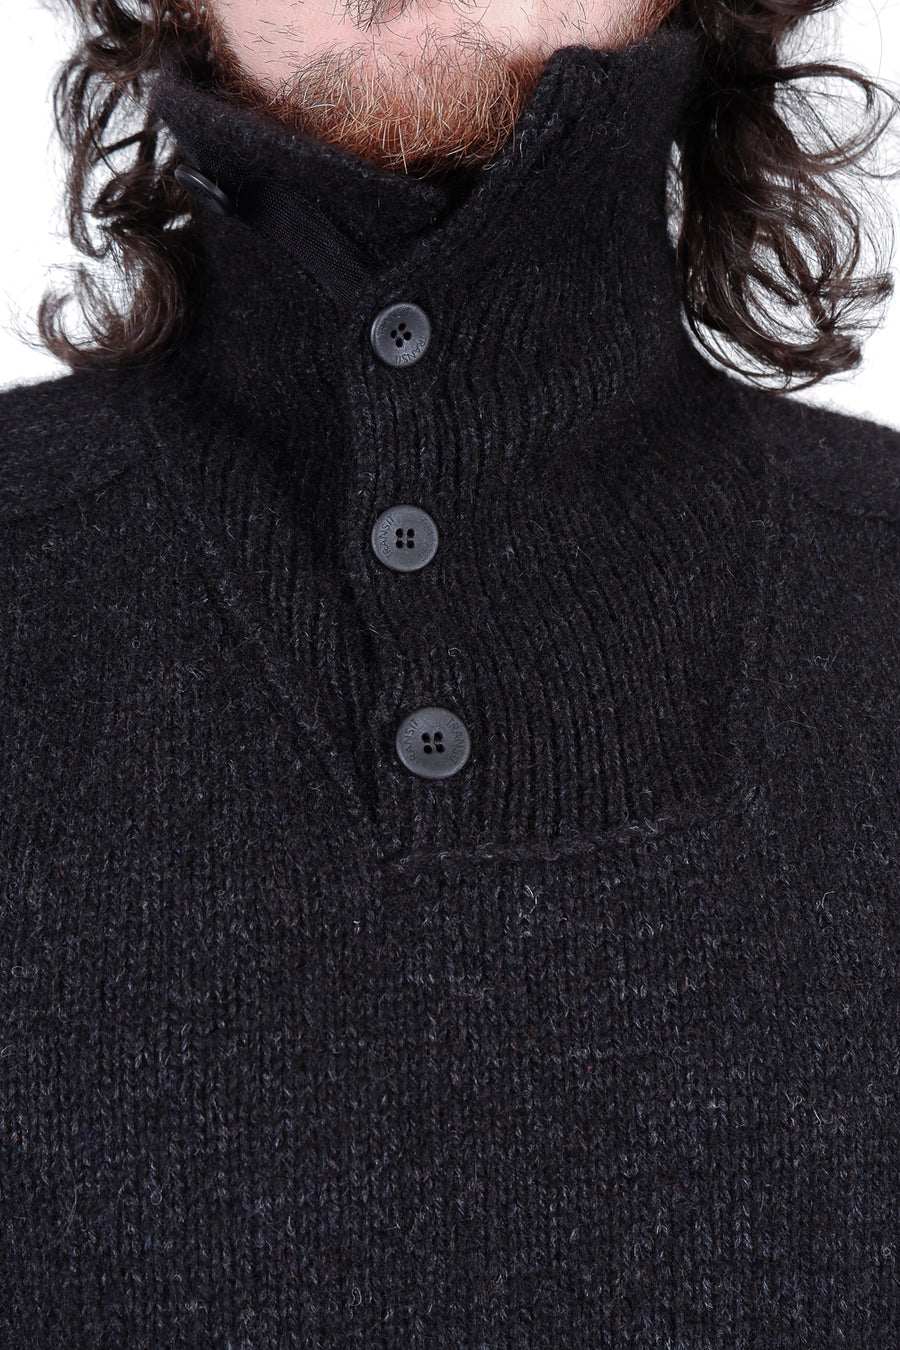 Buy the Transit Wool/Alpaca Turtleneck Knit in Black at Intro. Spend £50 for free UK delivery. Official stockists. We ship worldwide.